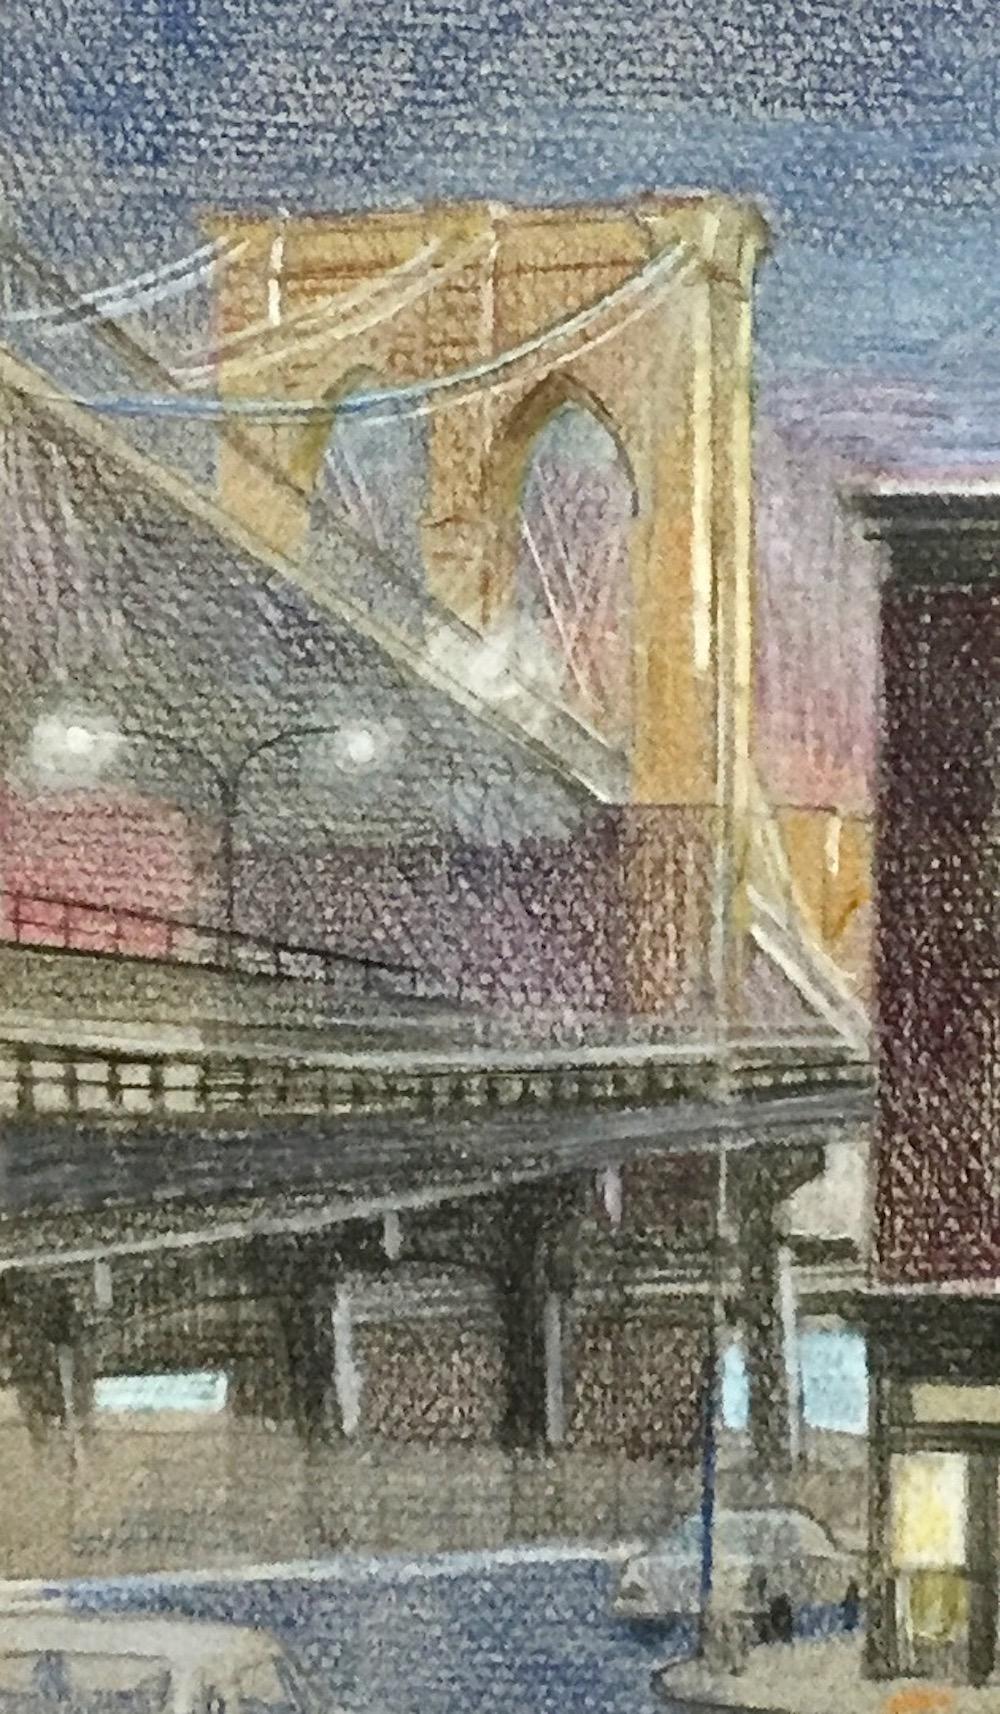 A classic Richard Haas (born 1936) New York City view. Signed in pencil lower right. The fact that it is signed within the image, the drawn-upon area, leads me to think the artist wanted it to be matted just to the image, blocking out the